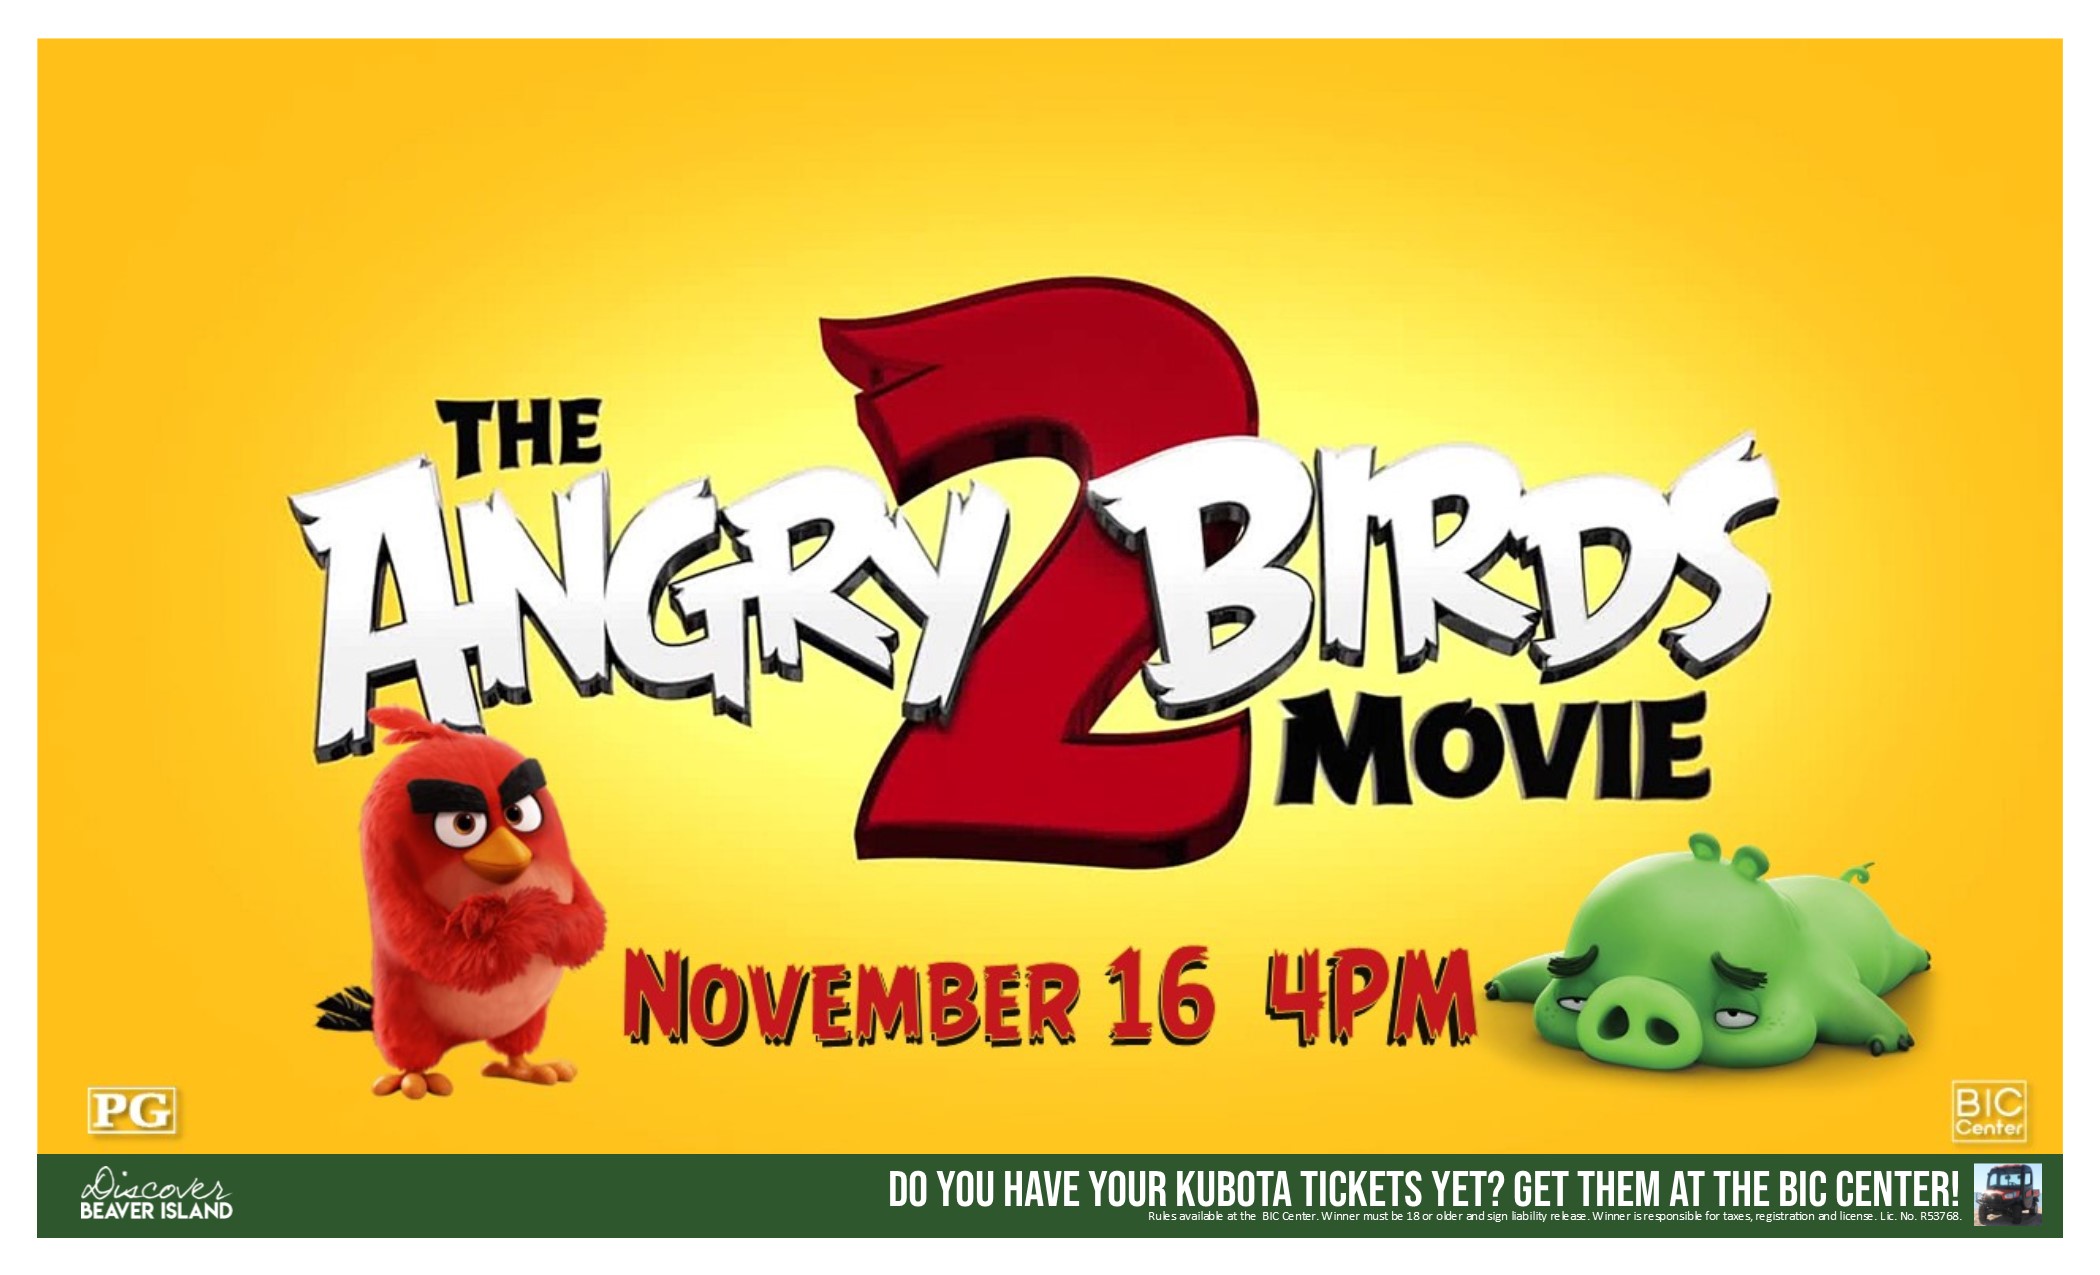 2019-11-16 Angry Birds 2 (Legal Size).jpg